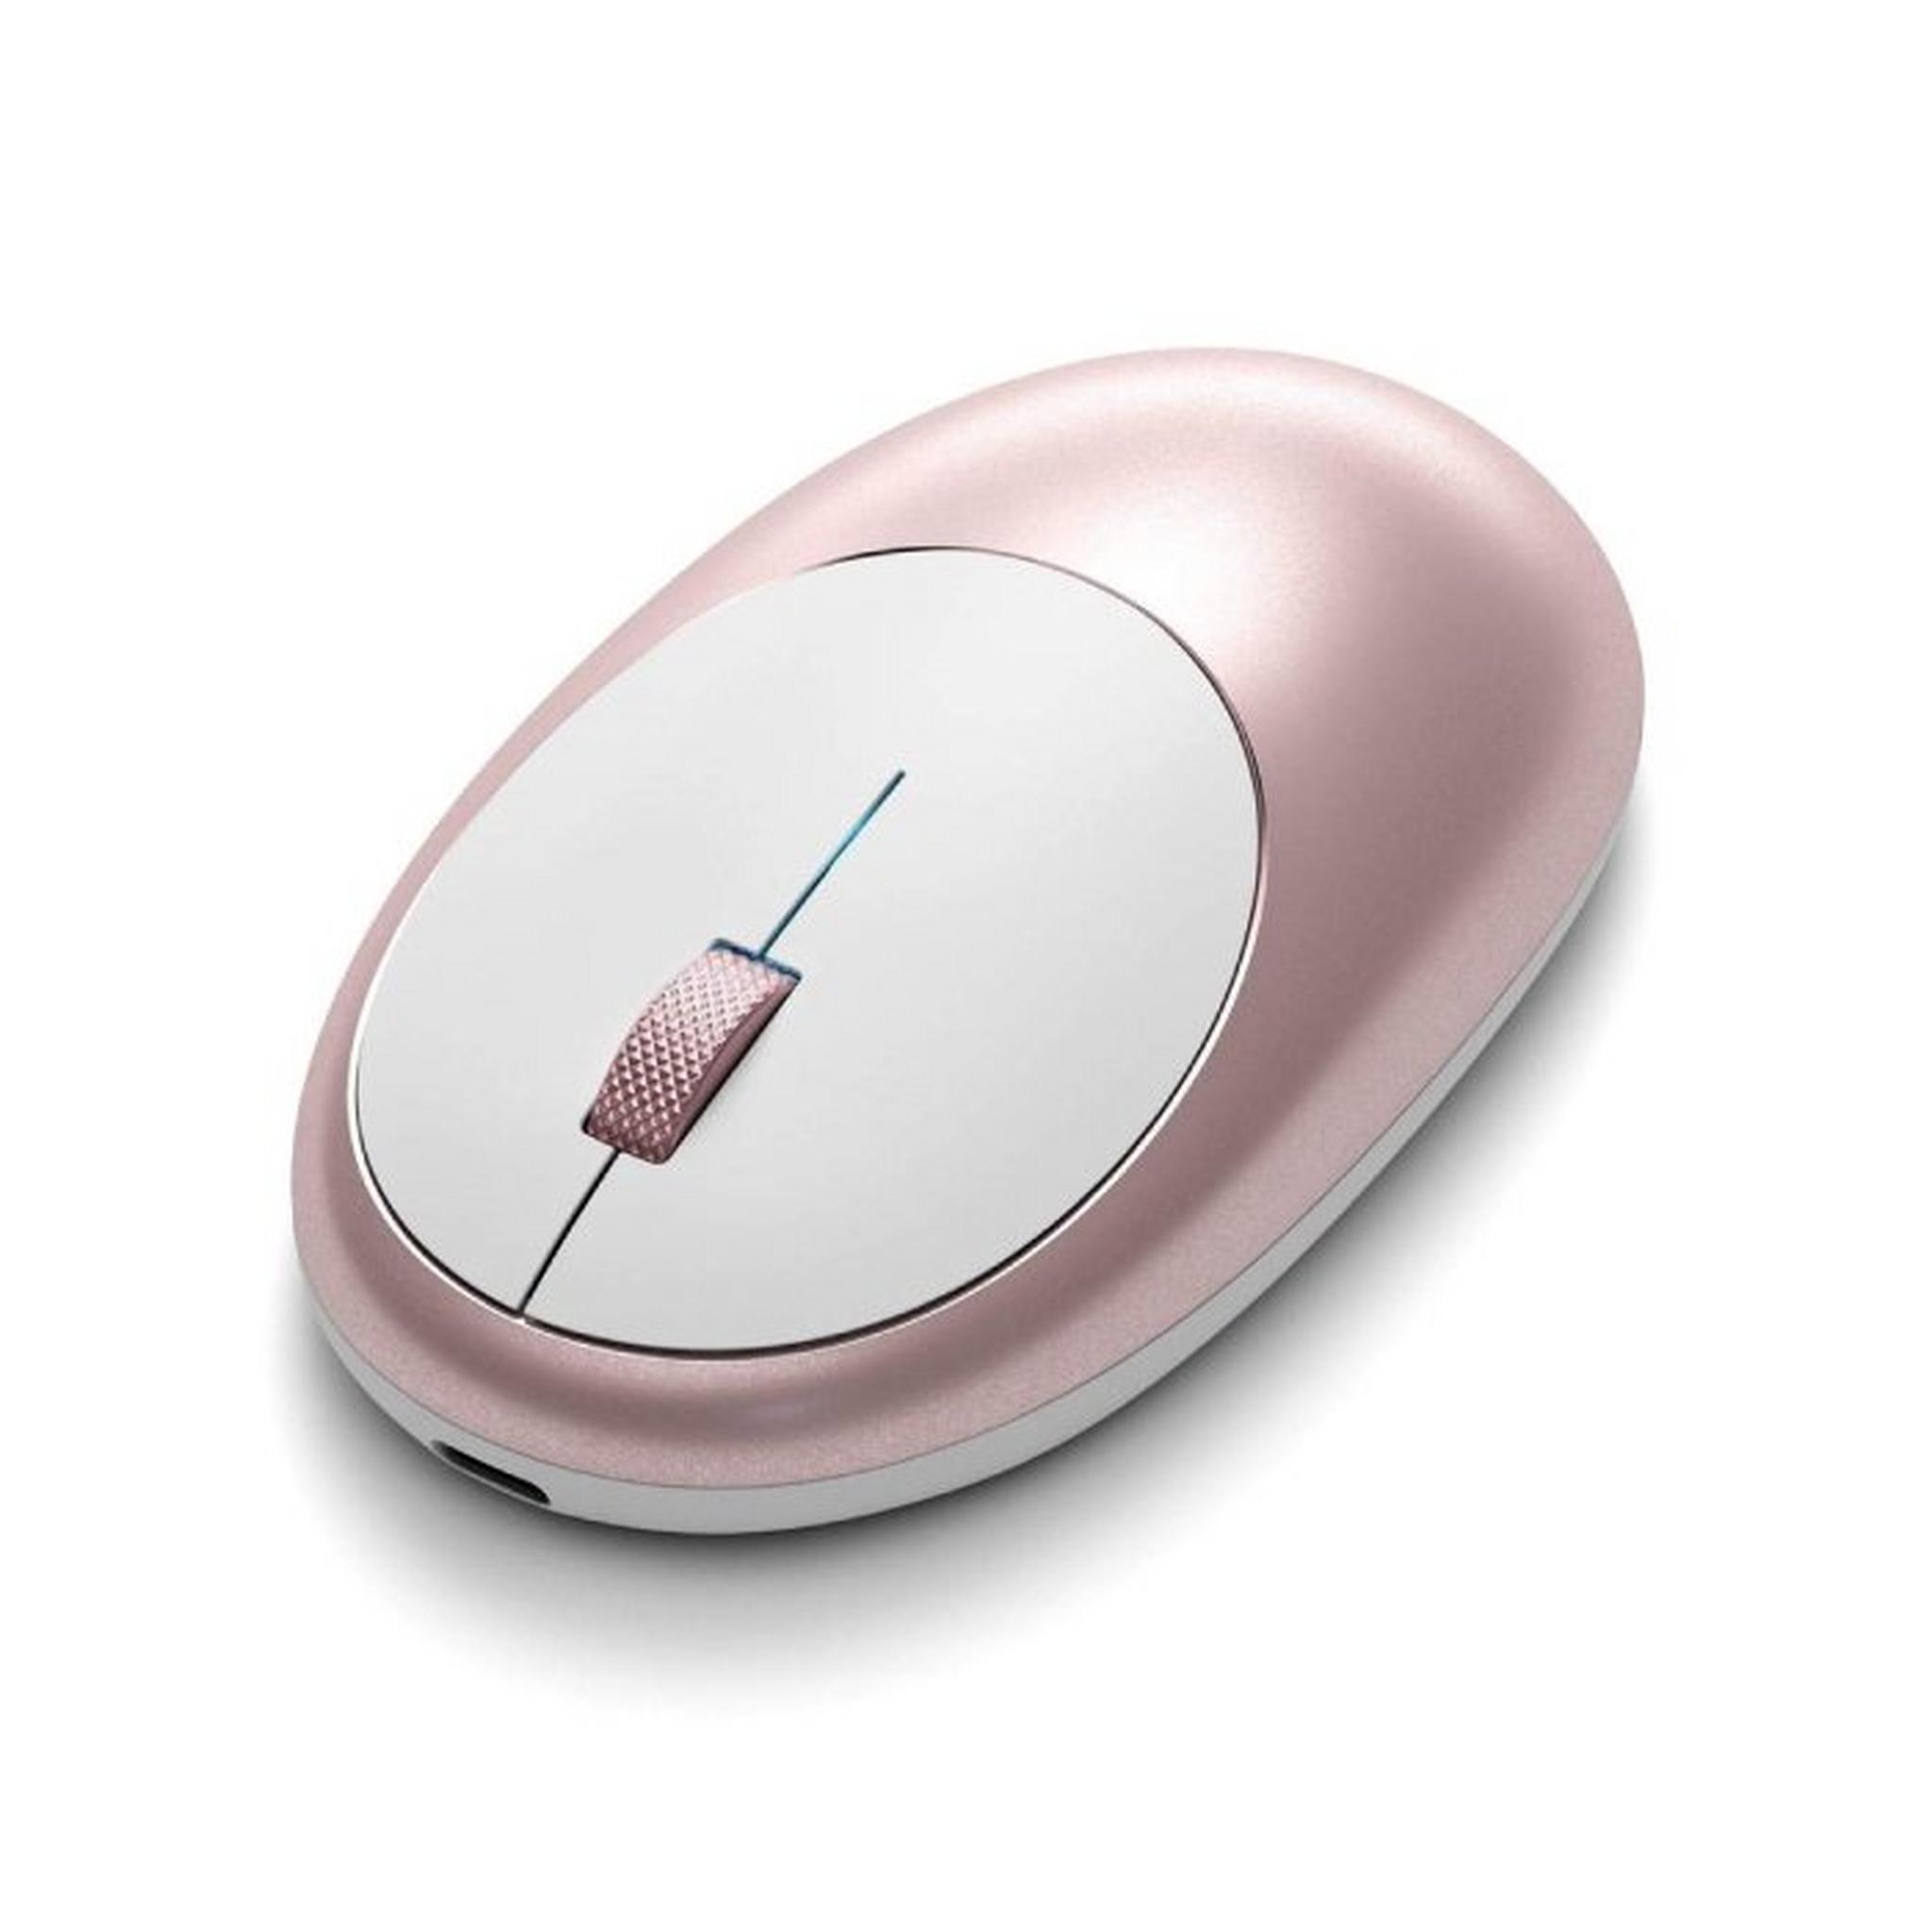 Satechi M1 Bluetooth Wireless Mouse - Rose Gold